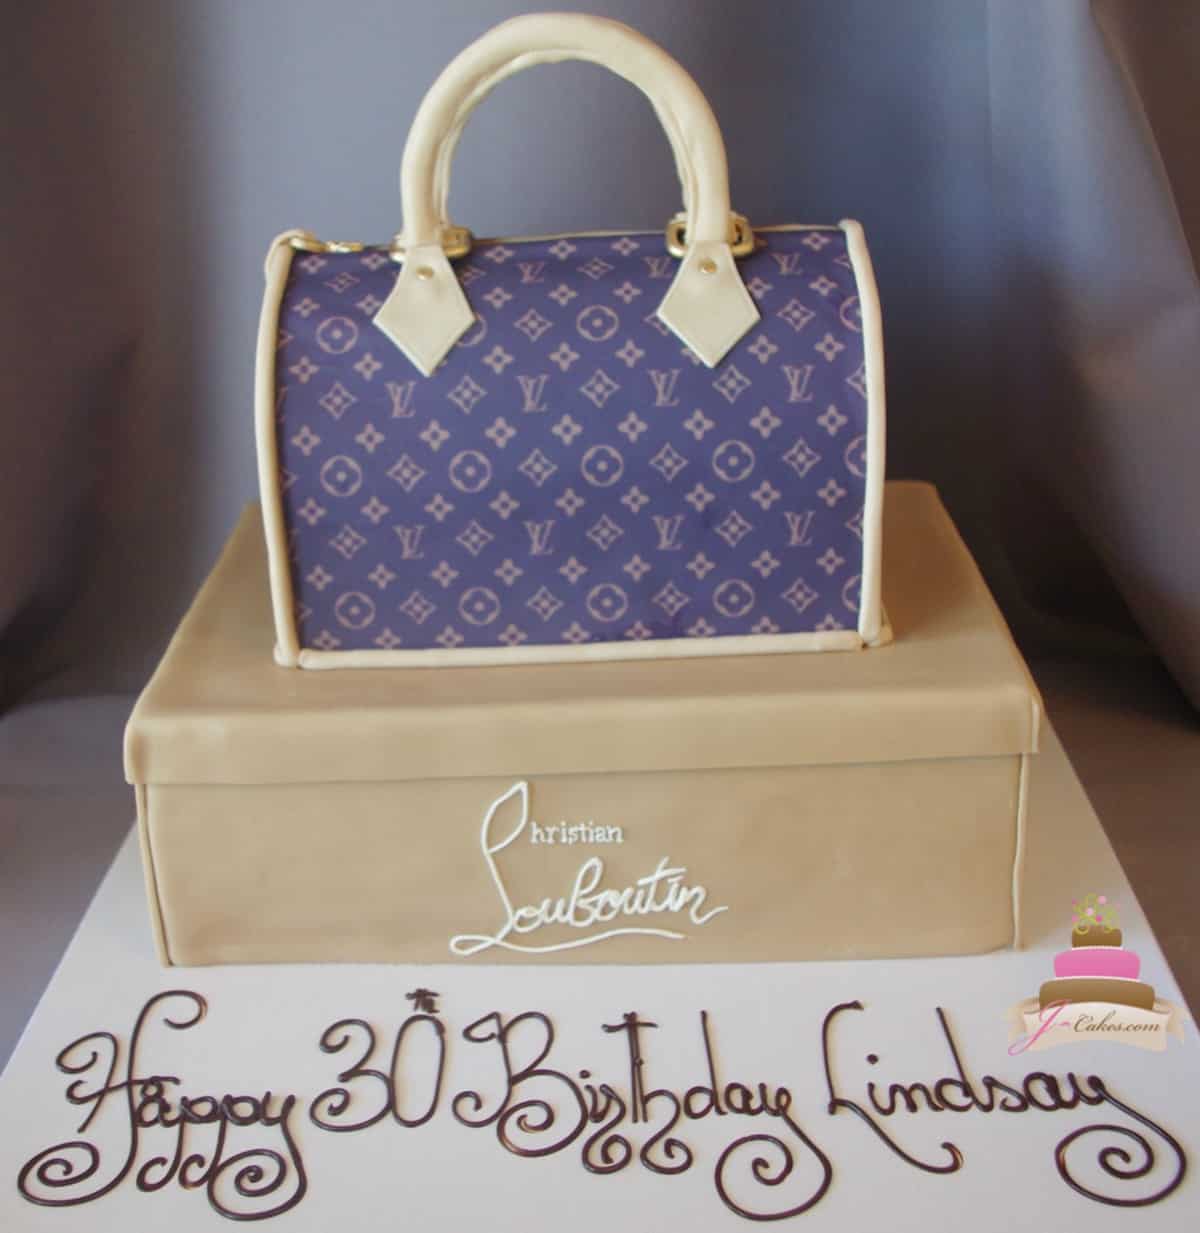 Fashionista Fondant Cake with Edible Louis Vuitton Luggage, Purse, and Shoe  side view